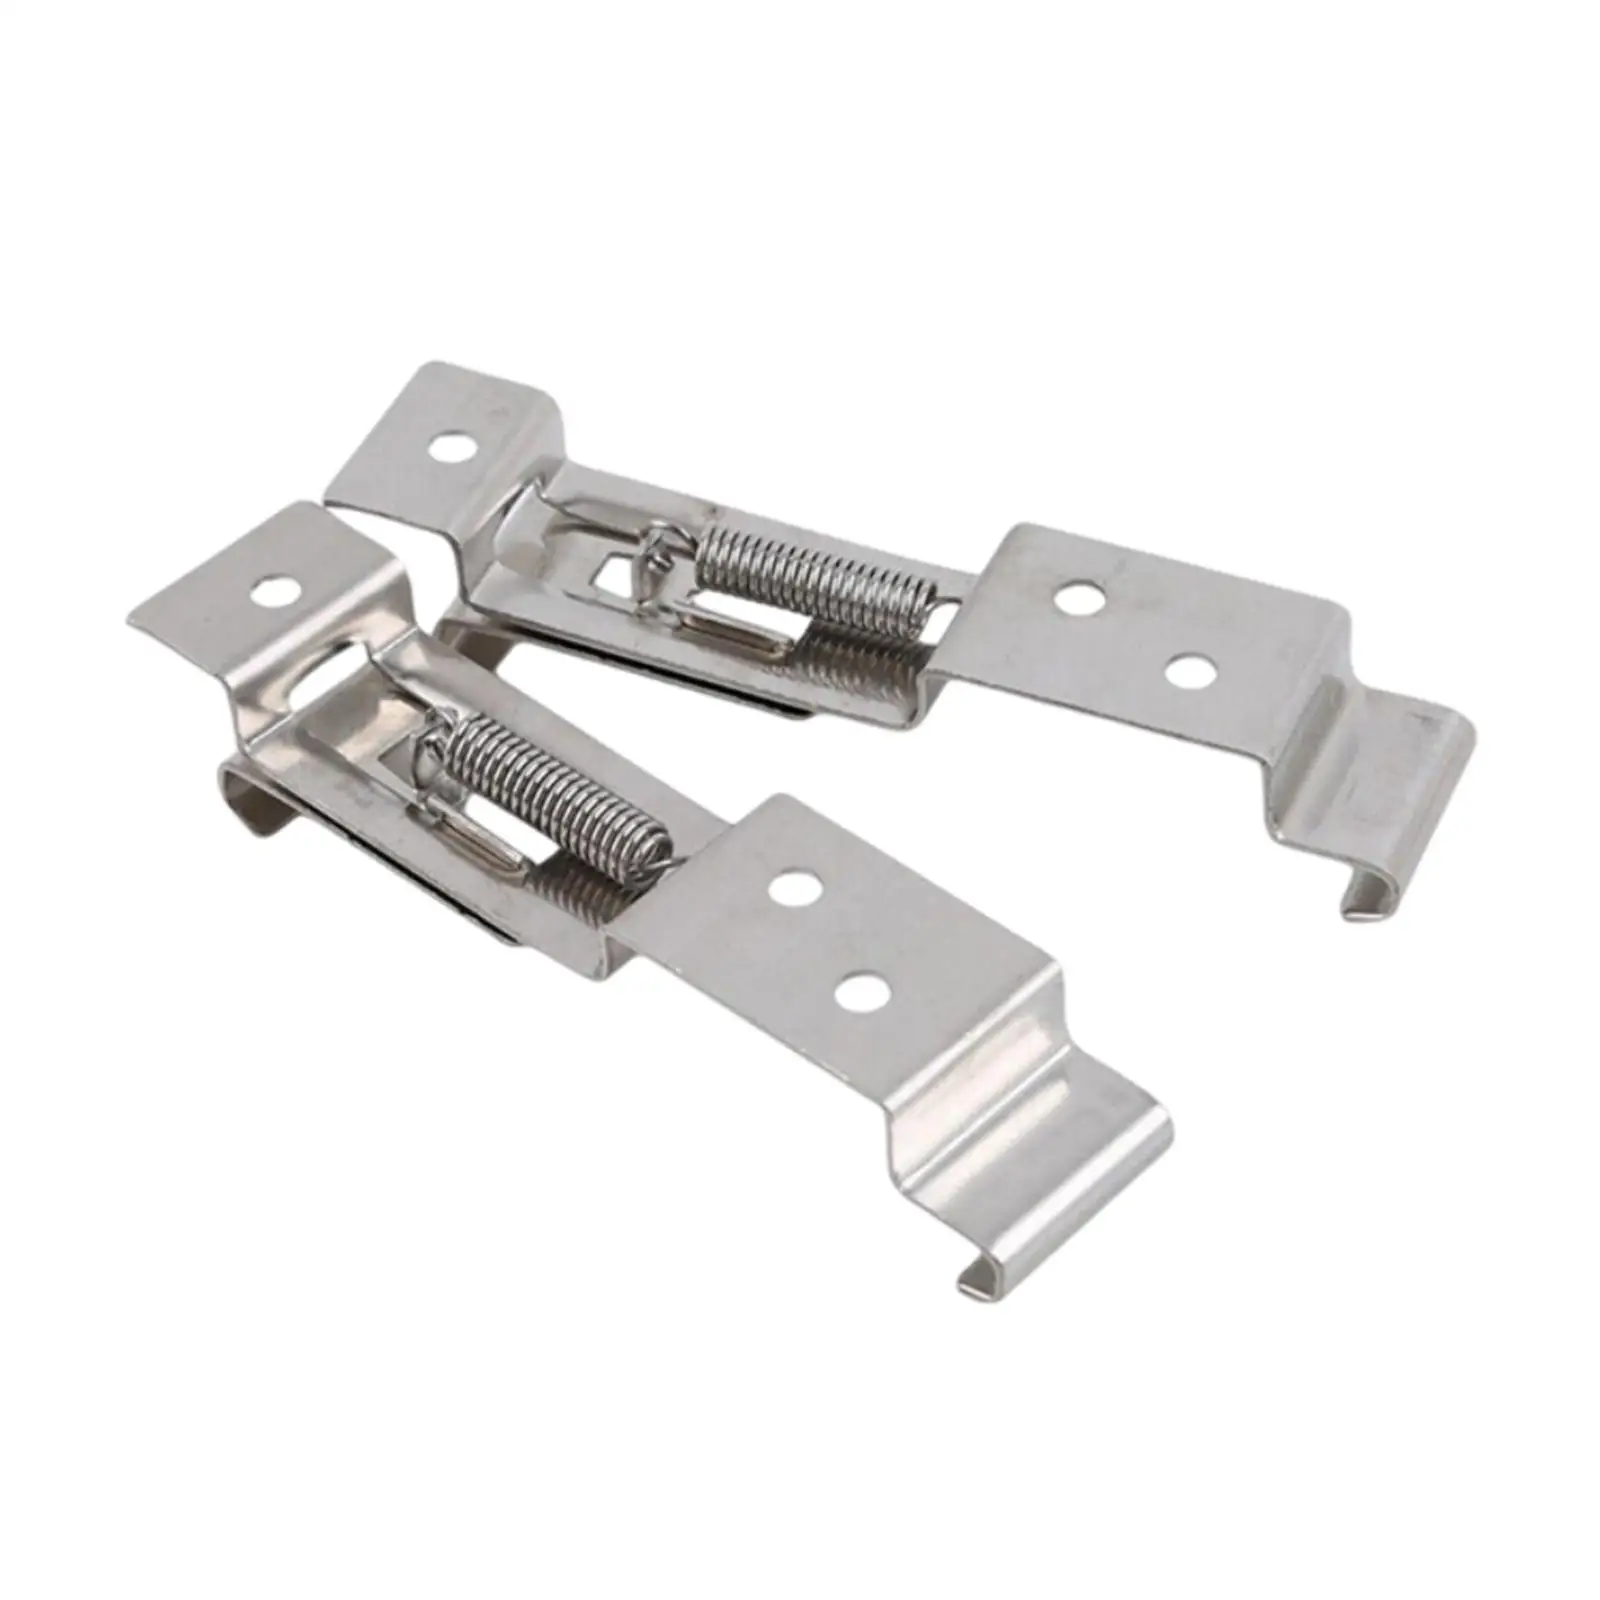 2Pcs Cars License Plate Cover Auto Trailer Number Plate Clips Spring Bracket for Truck RV Sturdy Repair Part Replacement